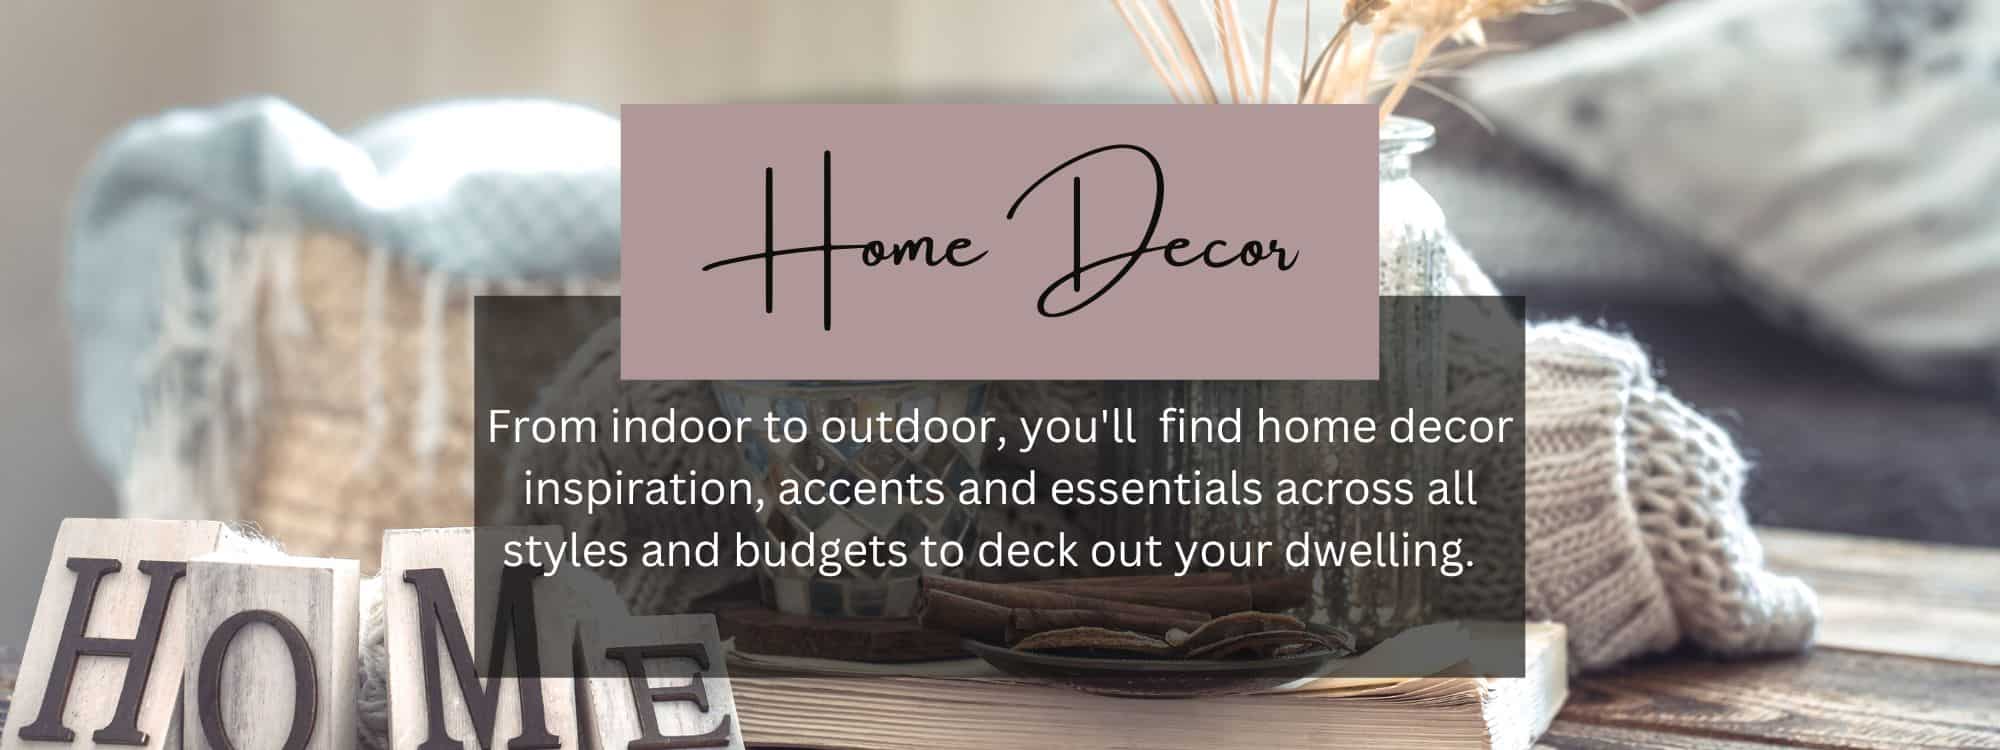 home decoration decor ideas inspiration accents essentials styles dwelling cozy living room bedroom kitchen holiday decor thanksgiving christmas spring summer winter fall autumn after before affordable on a budget free wall art printables